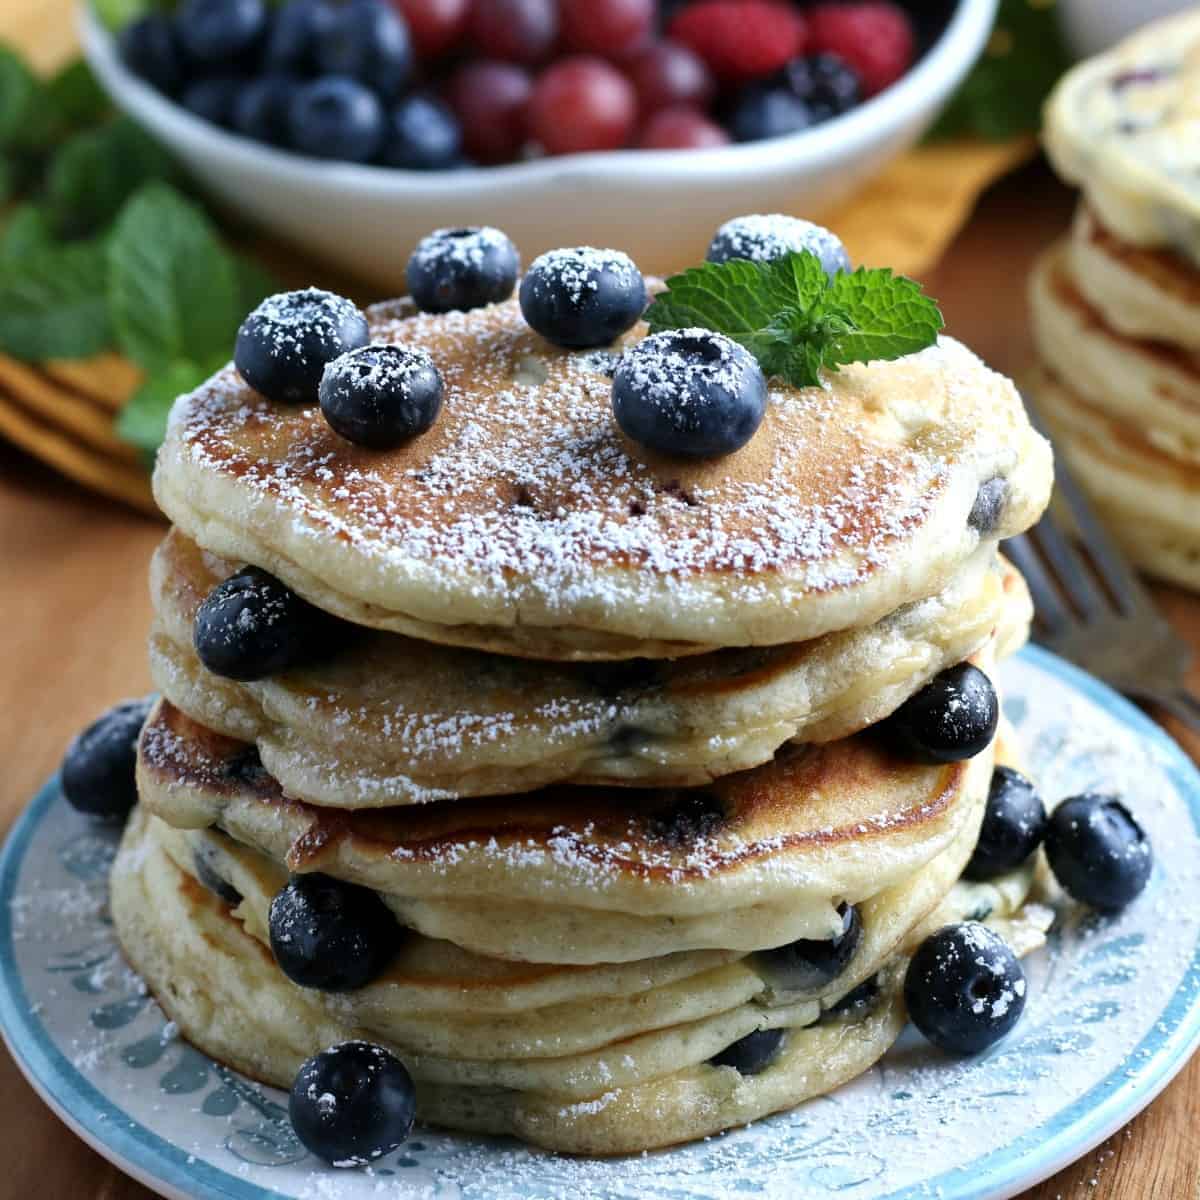 Stack of four pancakes showing blueberries and sprinkled with powdered sugar.